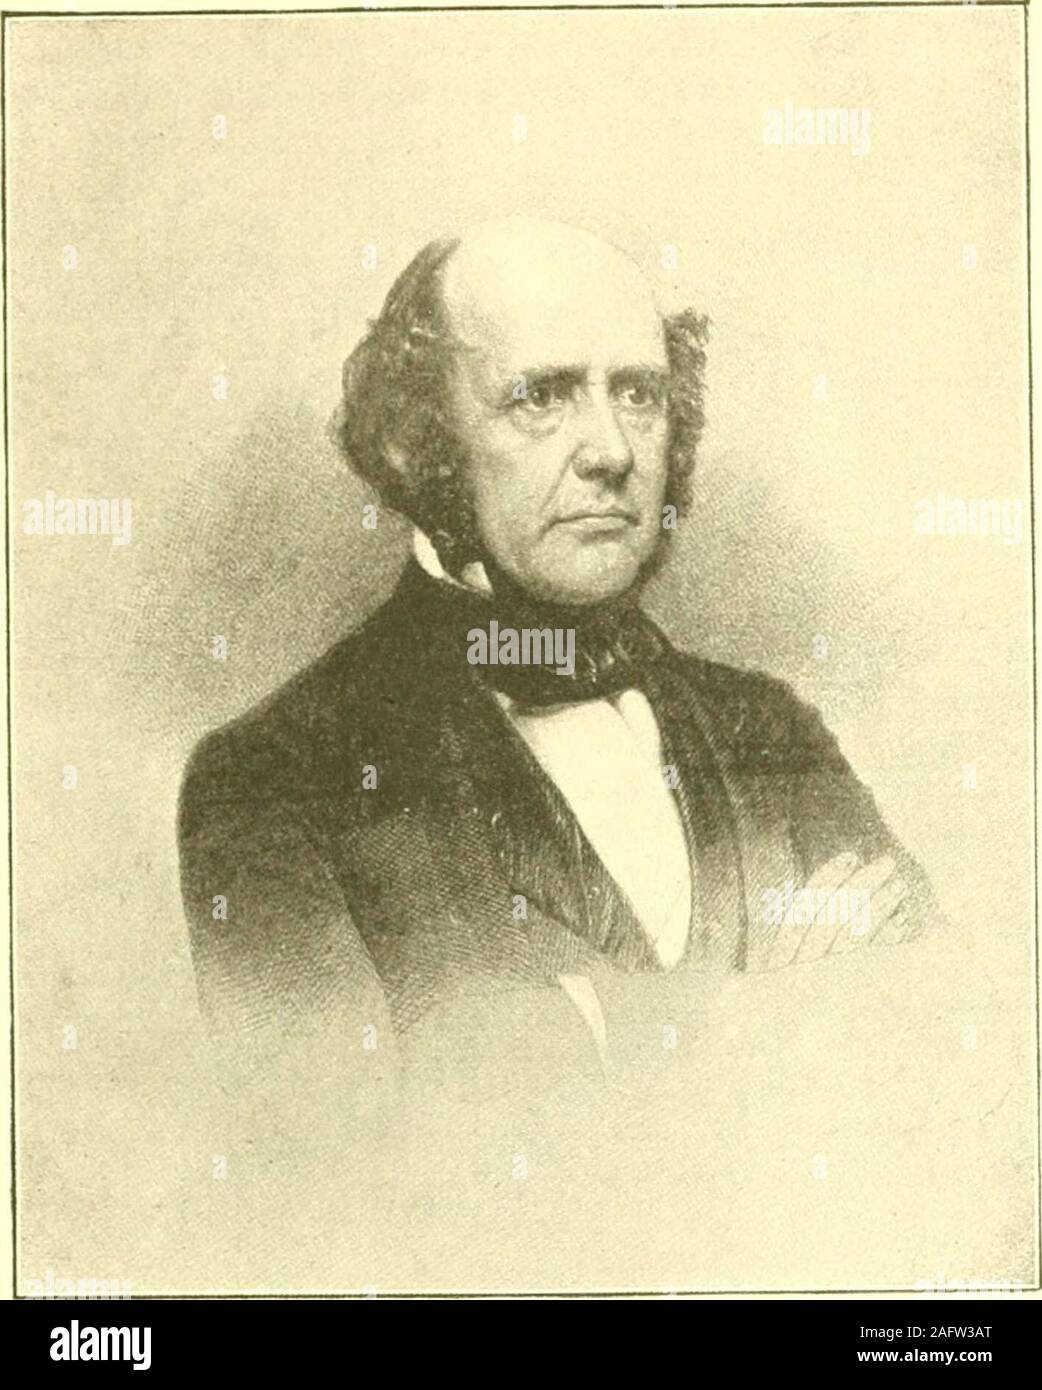 . 'Our county and its people' : A history of Hampden County, Massachusetts.. Springfield bar in later years, was a son of Mas-ter George Bliss. Samuel Lathrop. fourth son of Rev. Joseph Lathrop, wasborn in West Springfield in 1771, and died in 1846. He was agraduate of Yale college in 1792, and soon aftenvard entered theprofession in which he acqiiired a standing of prominence. Hewas ten years in the state senate, and president of that body in1819 and 1820. He was in the lower hoiise of the federal con-gress from 1818 to 1824. and once was a candidate for the gover-norship of Massachusetts. Du Stock Photo